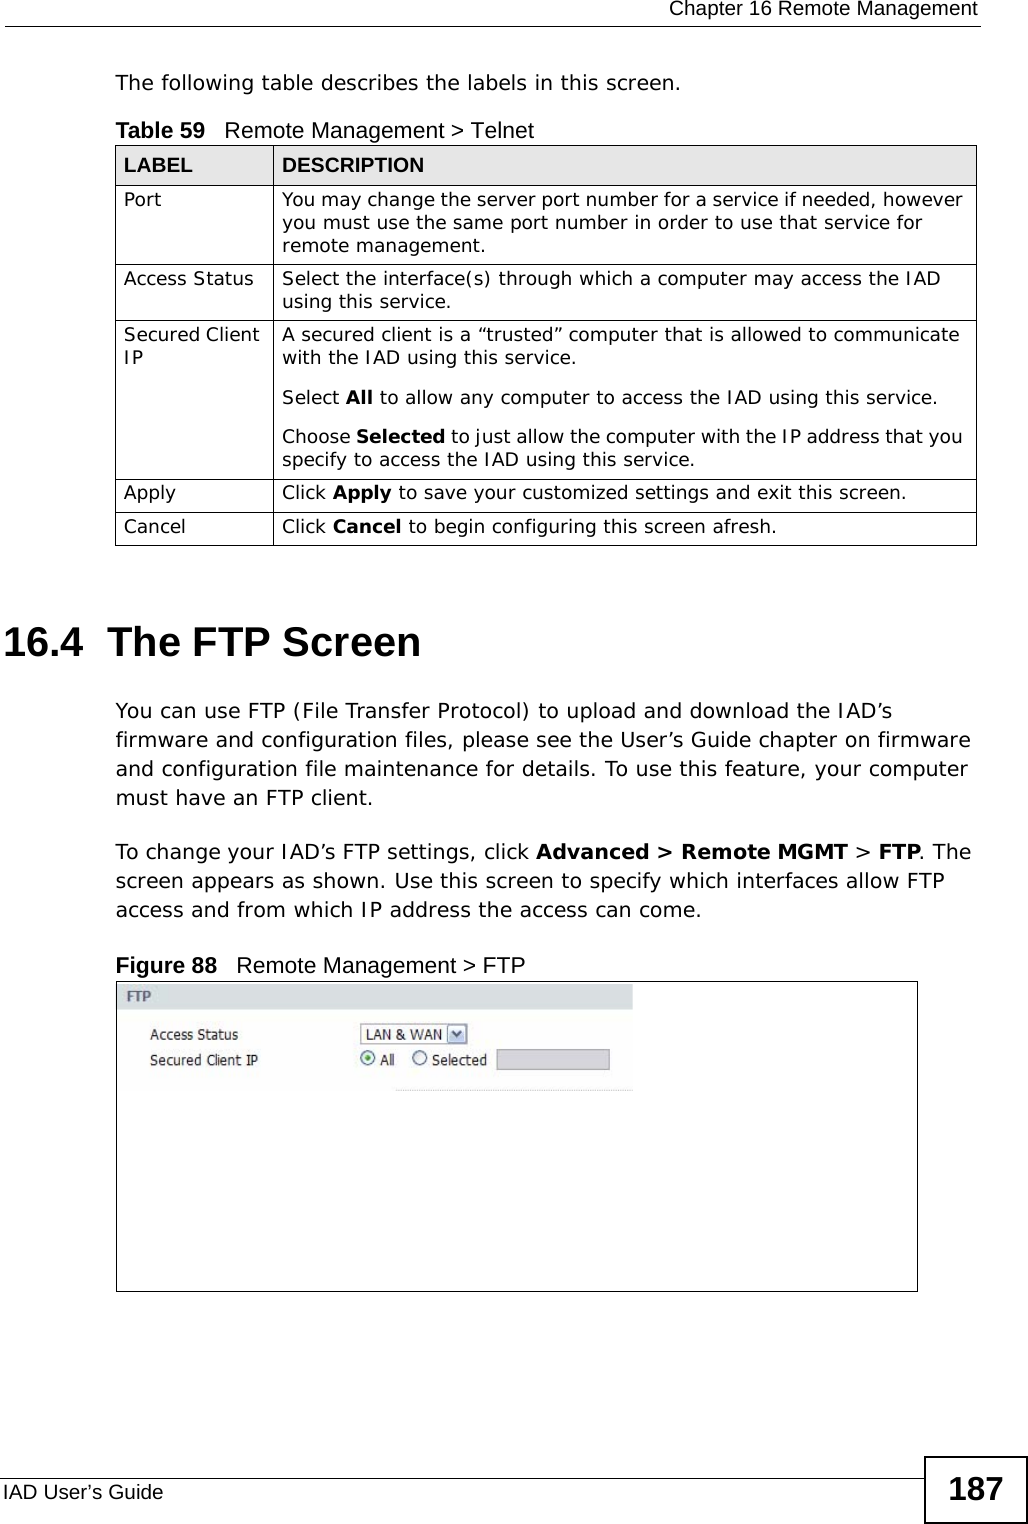  Chapter 16 Remote ManagementIAD User’s Guide 187The following table describes the labels in this screen.16.4  The FTP Screen You can use FTP (File Transfer Protocol) to upload and download the IAD’s firmware and configuration files, please see the User’s Guide chapter on firmware and configuration file maintenance for details. To use this feature, your computer must have an FTP client.To change your IAD’s FTP settings, click Advanced &gt; Remote MGMT &gt; FTP. The screen appears as shown. Use this screen to specify which interfaces allow FTP access and from which IP address the access can come. Figure 88   Remote Management &gt; FTPTable 59   Remote Management &gt; TelnetLABEL DESCRIPTIONPort You may change the server port number for a service if needed, however you must use the same port number in order to use that service for remote management.Access Status Select the interface(s) through which a computer may access the IAD using this service.Secured Client IP A secured client is a “trusted” computer that is allowed to communicate with the IAD using this service. Select All to allow any computer to access the IAD using this service.Choose Selected to just allow the computer with the IP address that you specify to access the IAD using this service.Apply Click Apply to save your customized settings and exit this screen. Cancel Click Cancel to begin configuring this screen afresh.